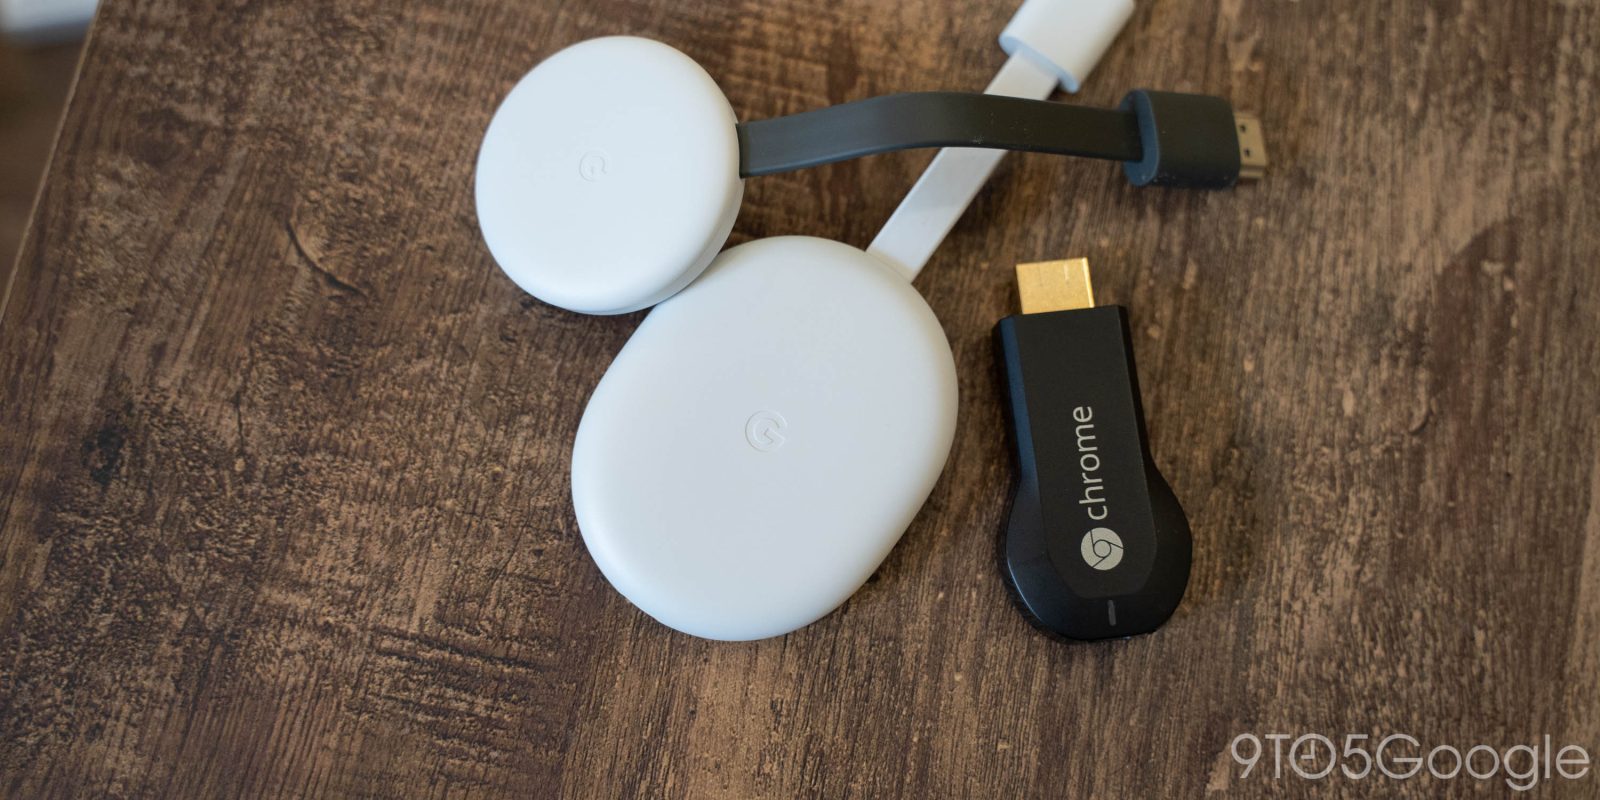 inerti Vuggeviser Martin Luther King Junior Google updates 2013 Chromecast for first time in over three years